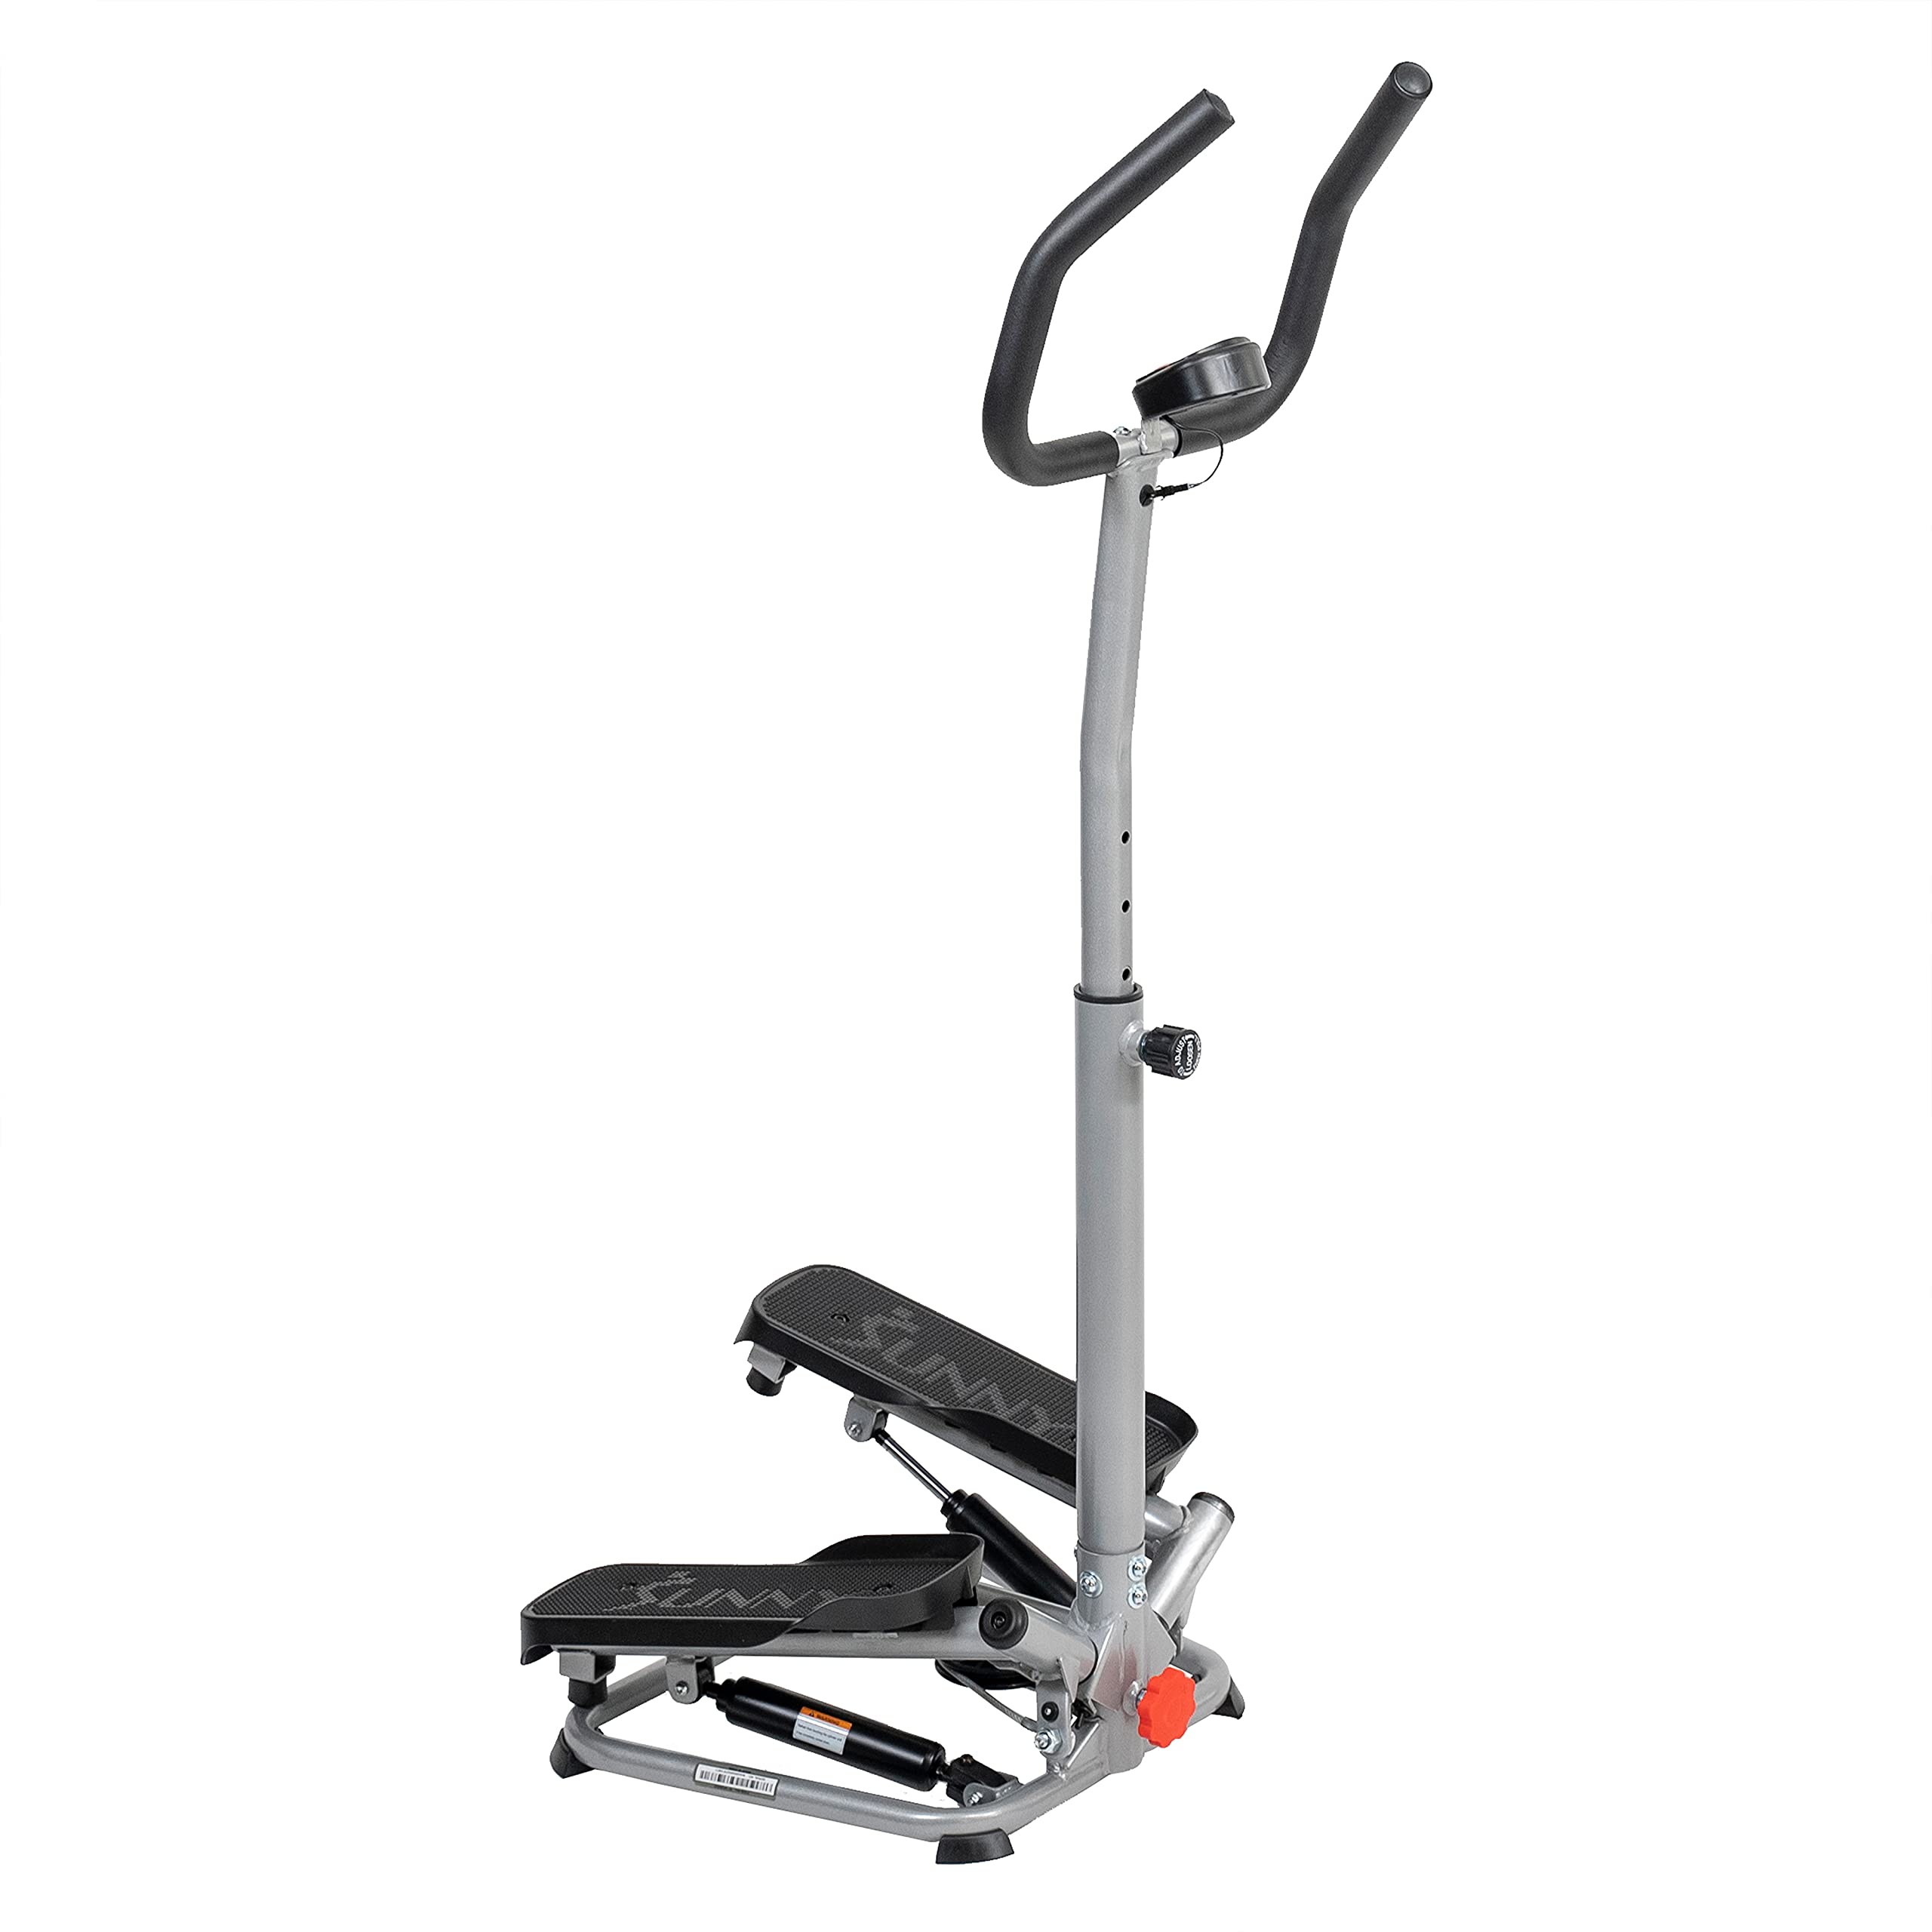 Sunny Health & Fitness Twisting Stair Stepper Machine with Handlebar and Digital Display